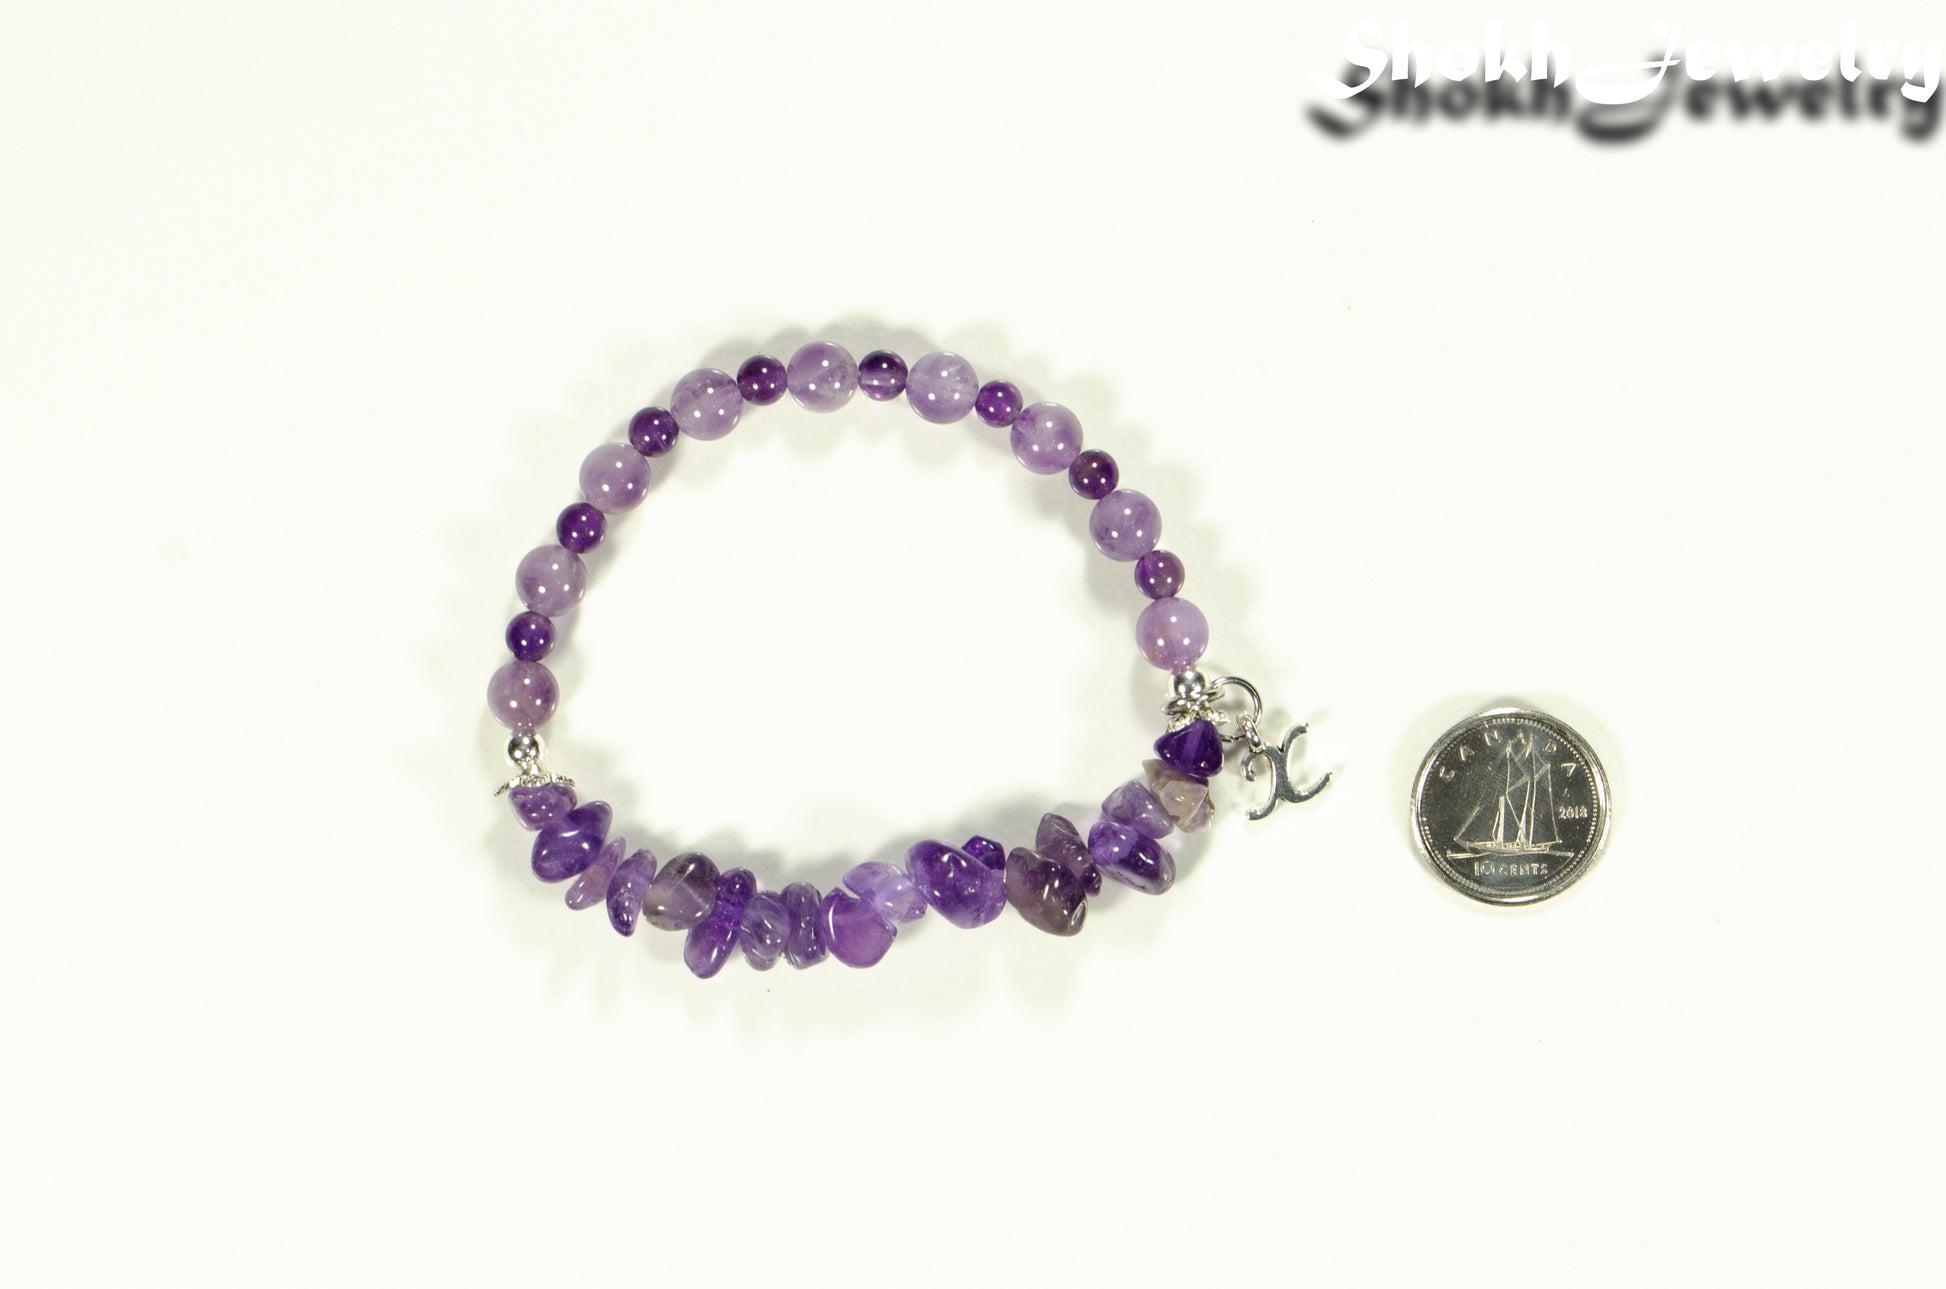 Amethyst Chip and Beads Bracelet with Initial beside a dime.